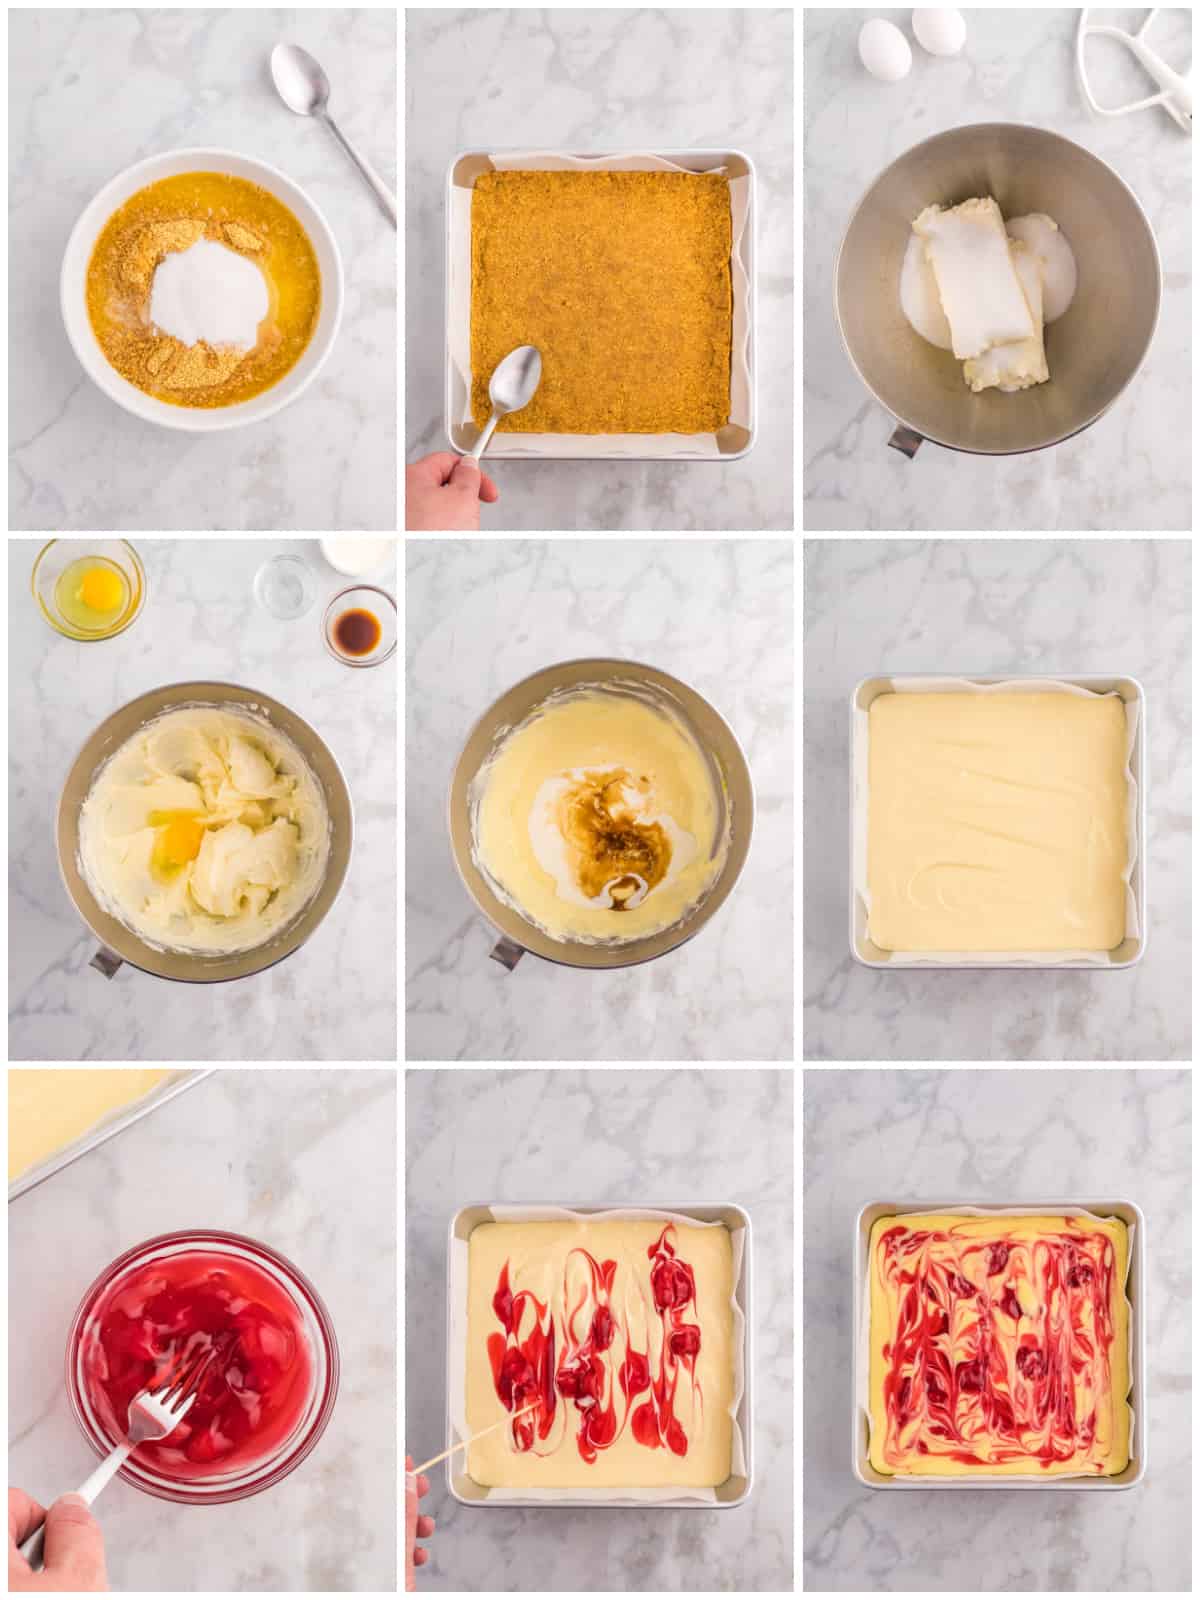 Step by step photos on how to make Cherry Cheesecake Bars.